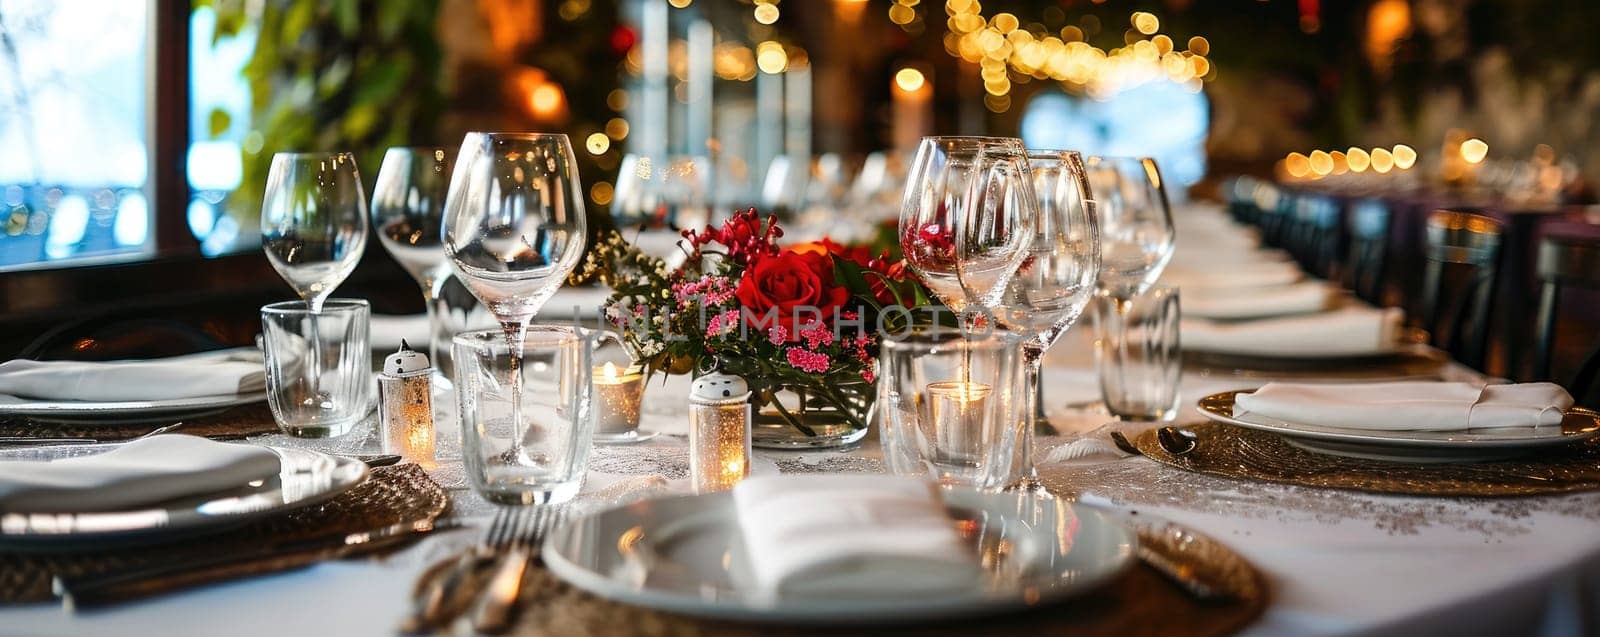 A stylish decorated meal in an elegant venue